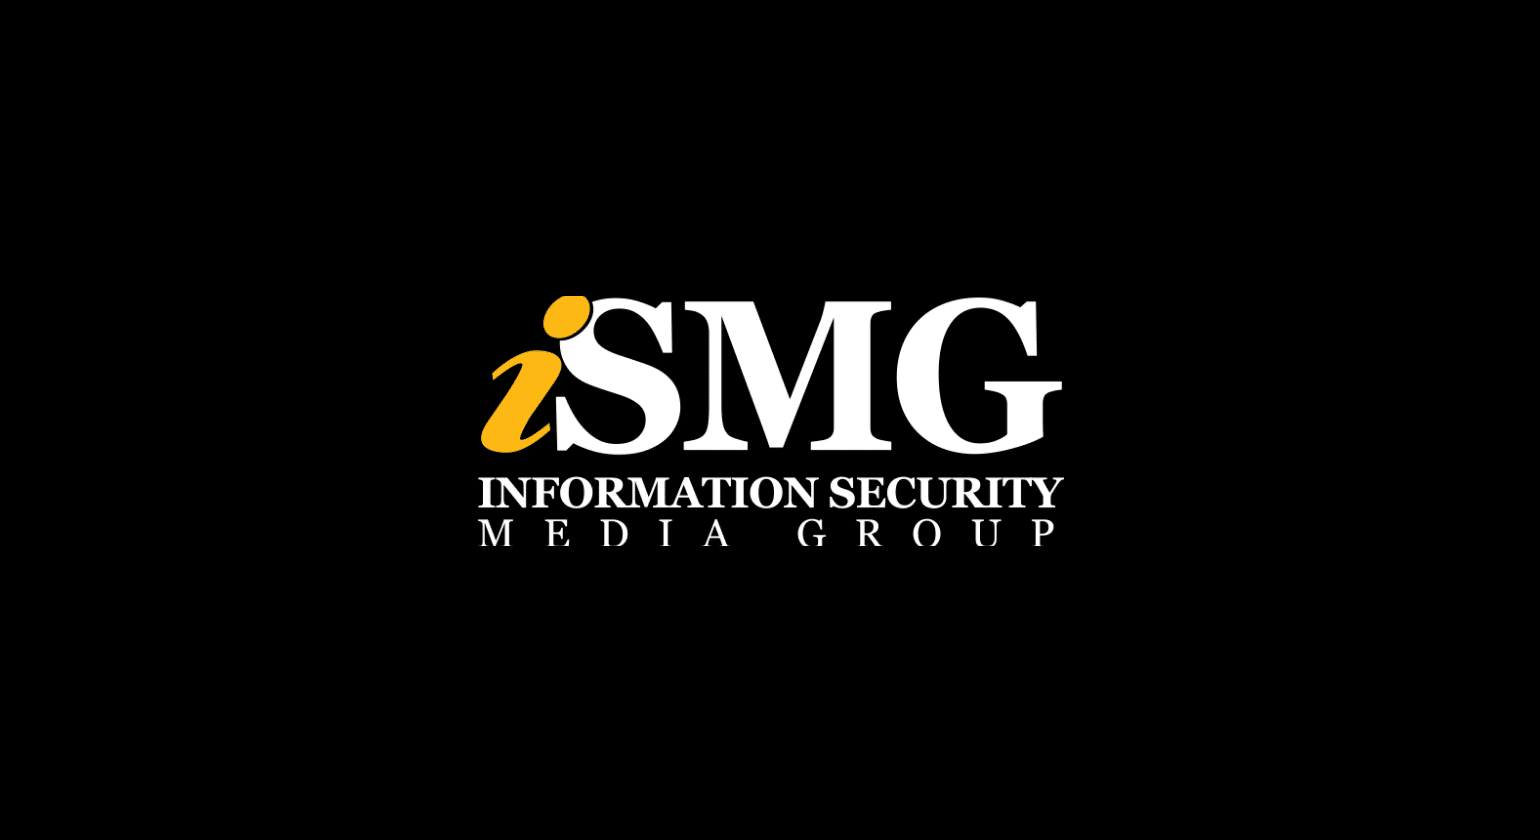 iSMC Information Security Media Group